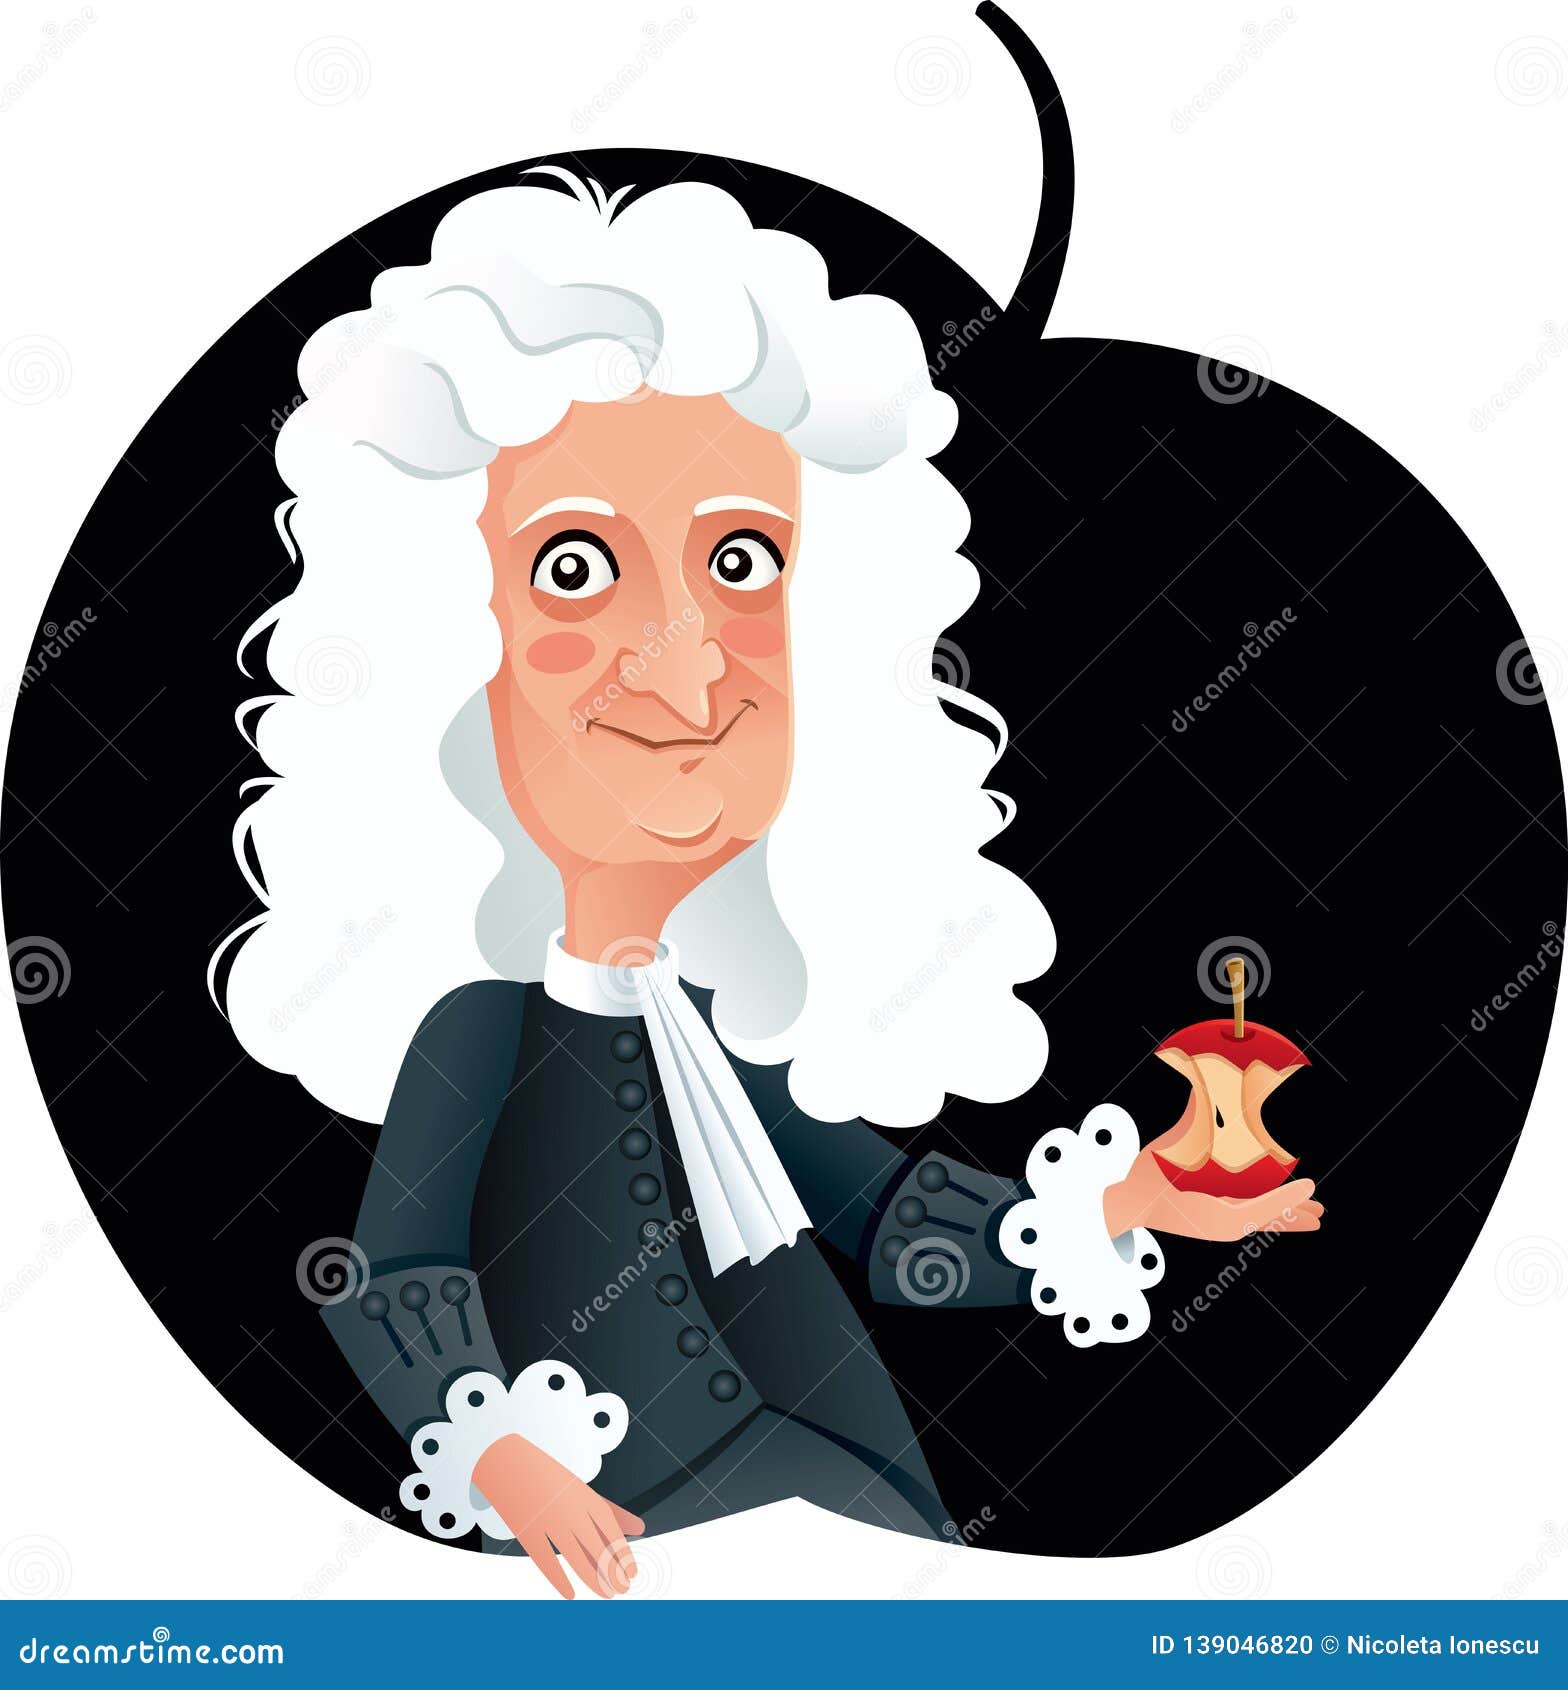 Sir Isaac Newton Vector Caricature Stock Vector - Illustration of force